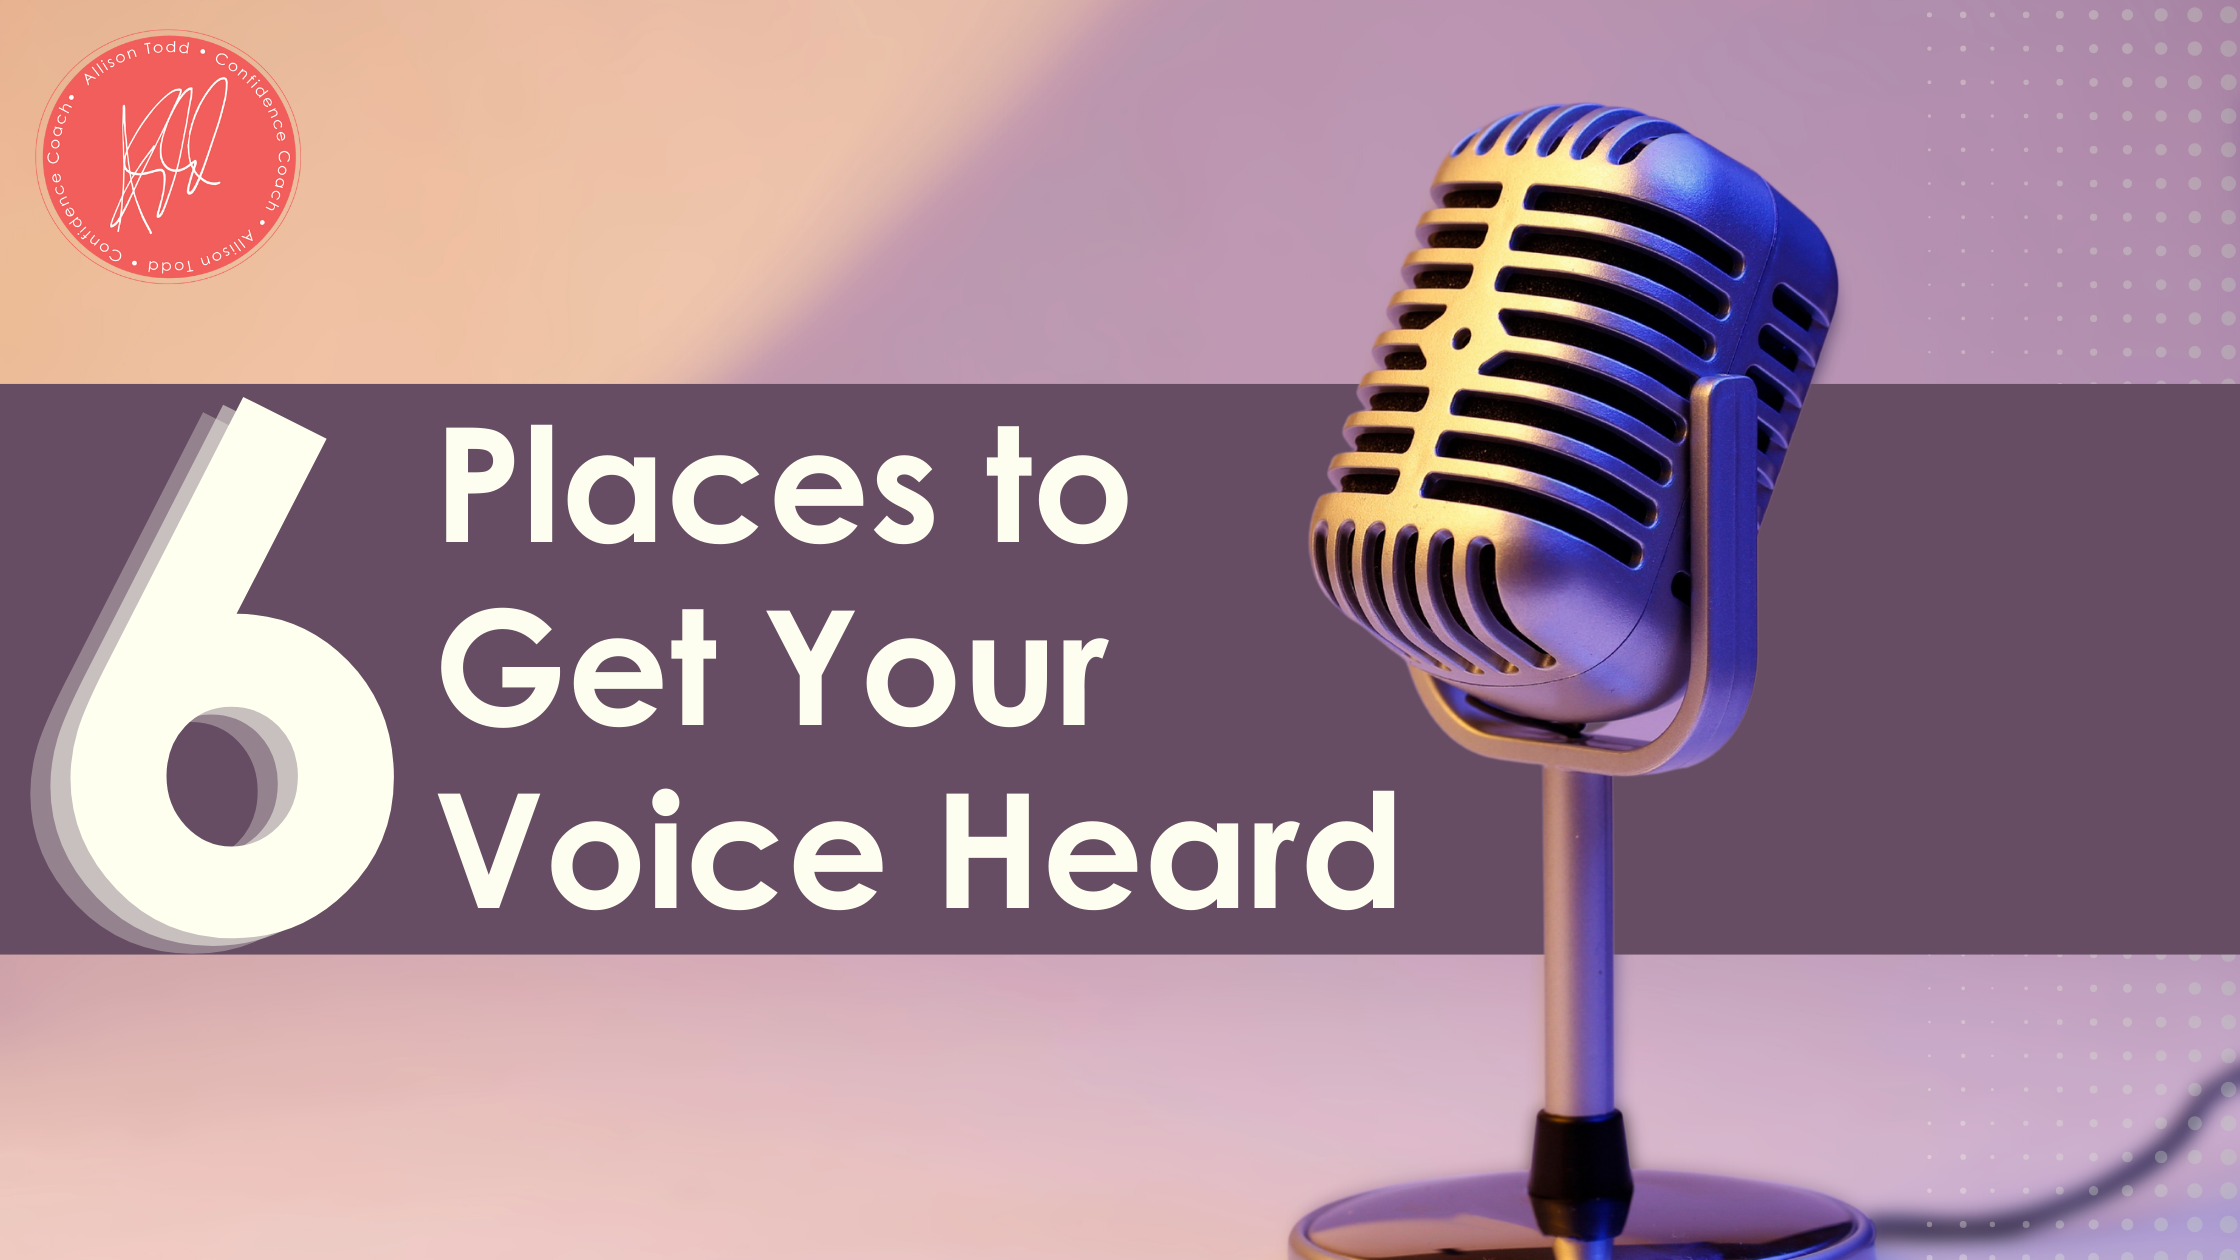 6 Places to Get Your Voice Heard